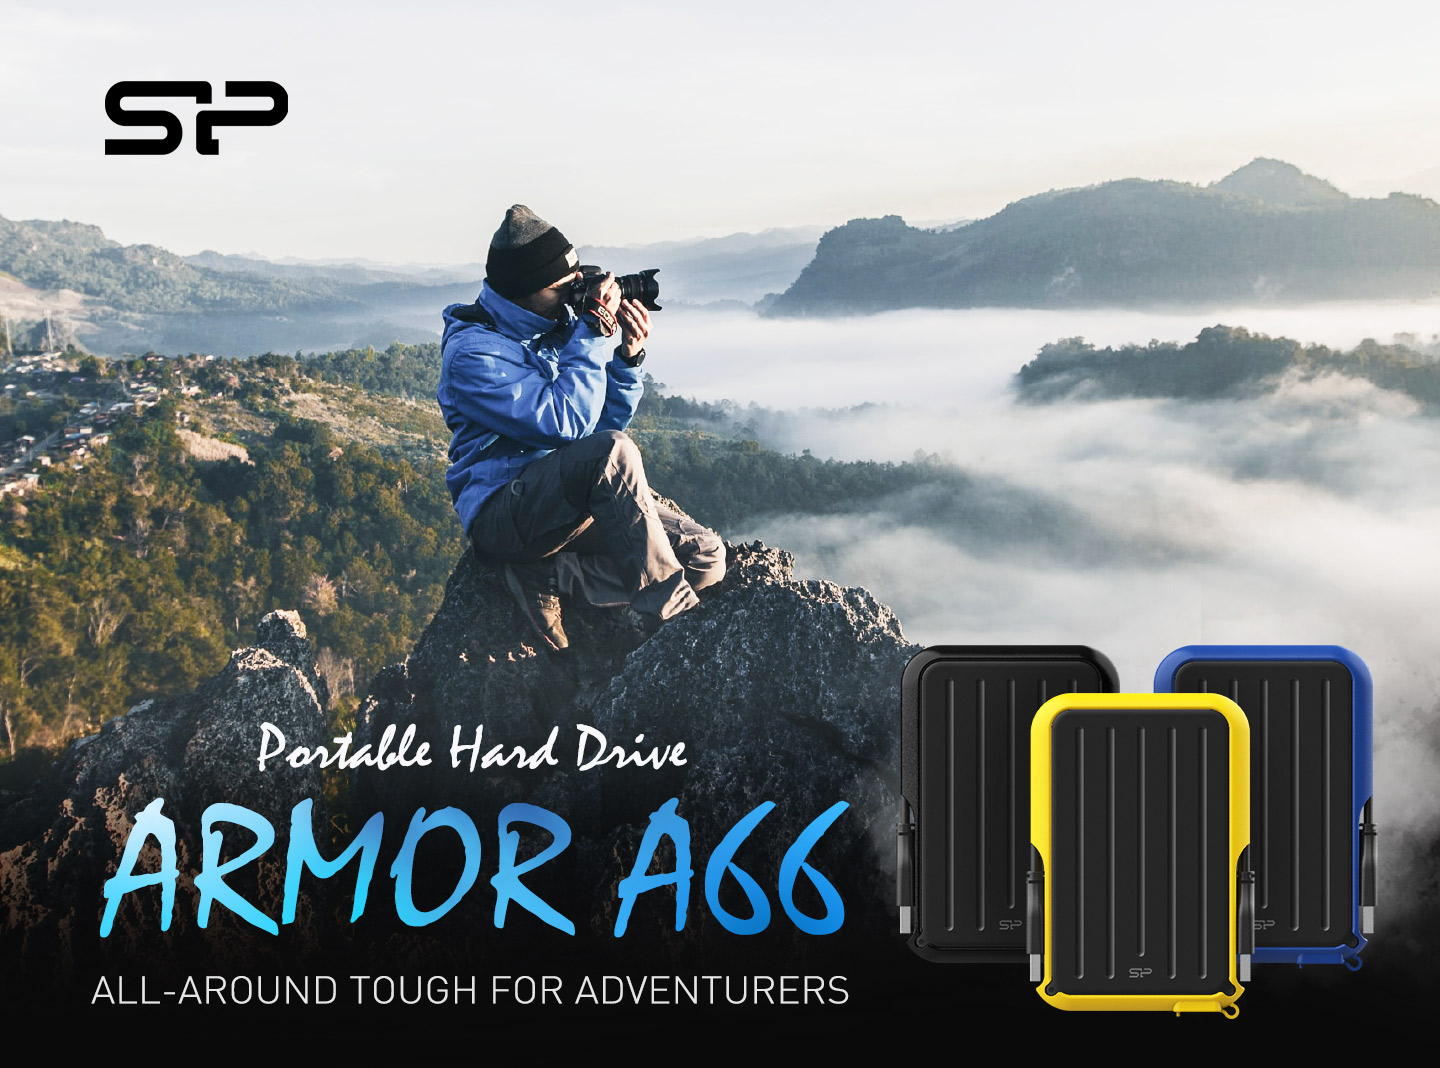 External-Hard-Drives-Silicon-Power-5TB-A66-Rugged-Shockproof-Water-resistant-Portable-External-Hard-Drive-USB-3-0-Yellow-3